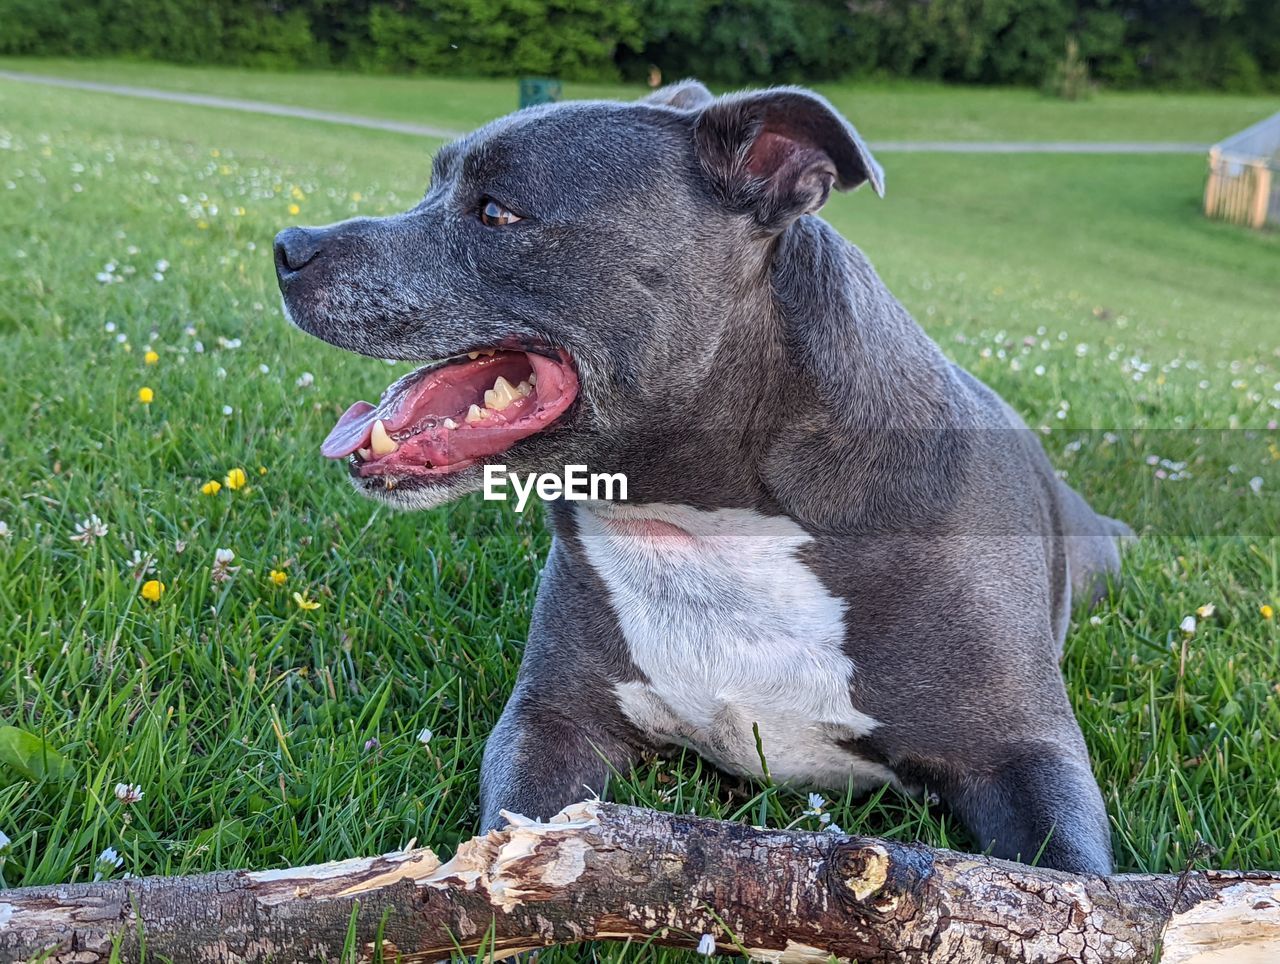 animal themes, dog, animal, pet, one animal, mammal, canine, domestic animals, grass, plant, facial expression, nature, terrier, no people, sticking out tongue, mouth open, day, field, carnivore, looking, looking away, outdoors, land, animal body part, animal mouth